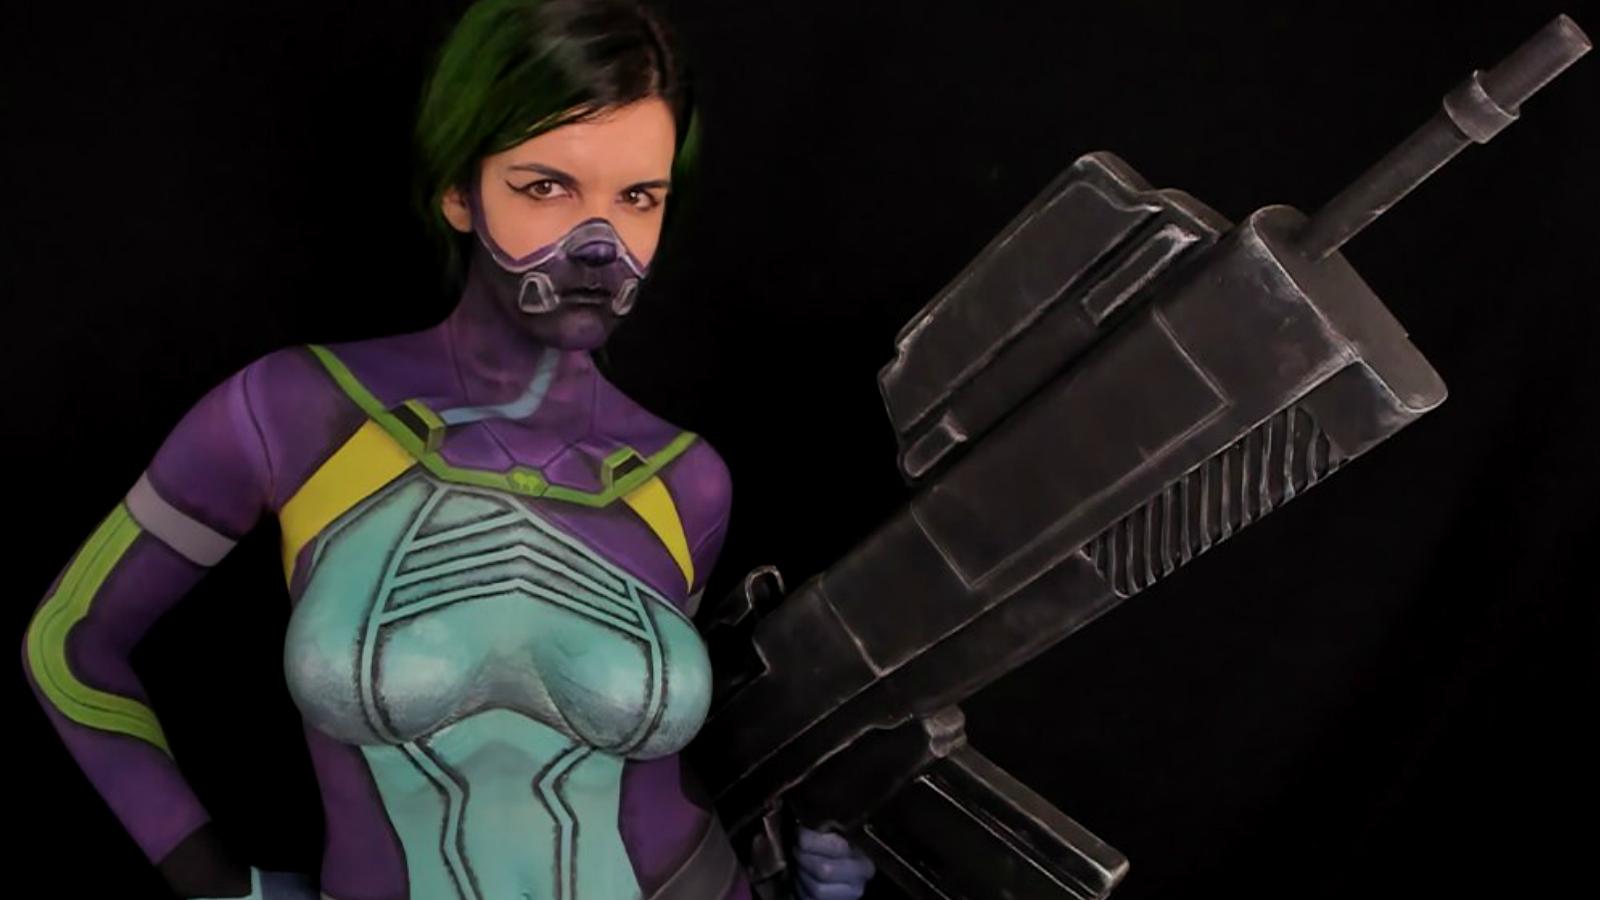 Body painting streamer on Twitch